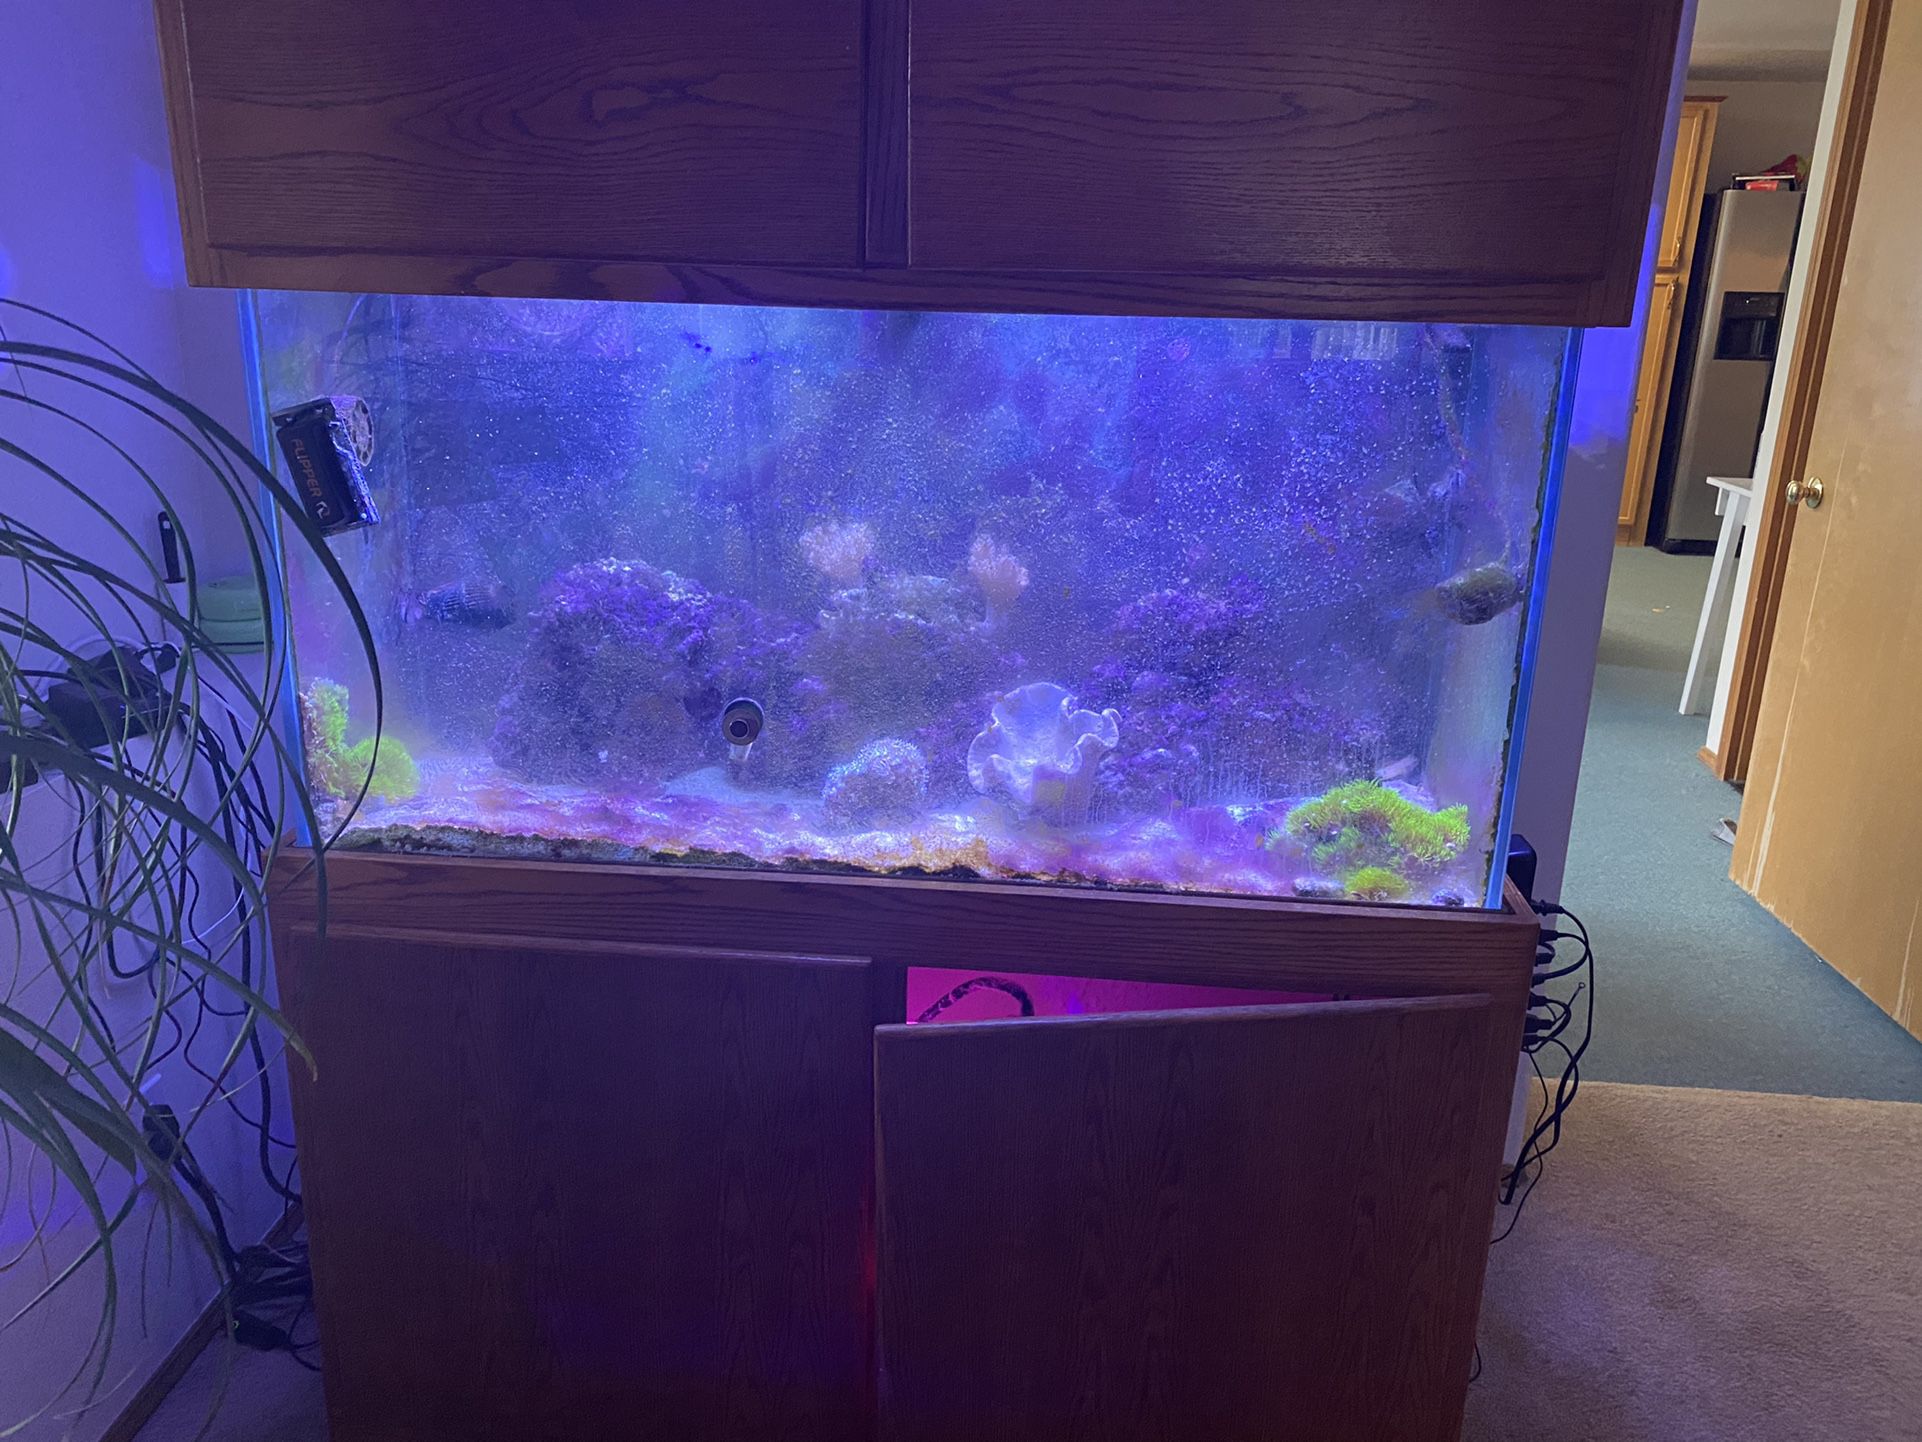 100 gallon tank, I’ll fish and see enemies and live plants